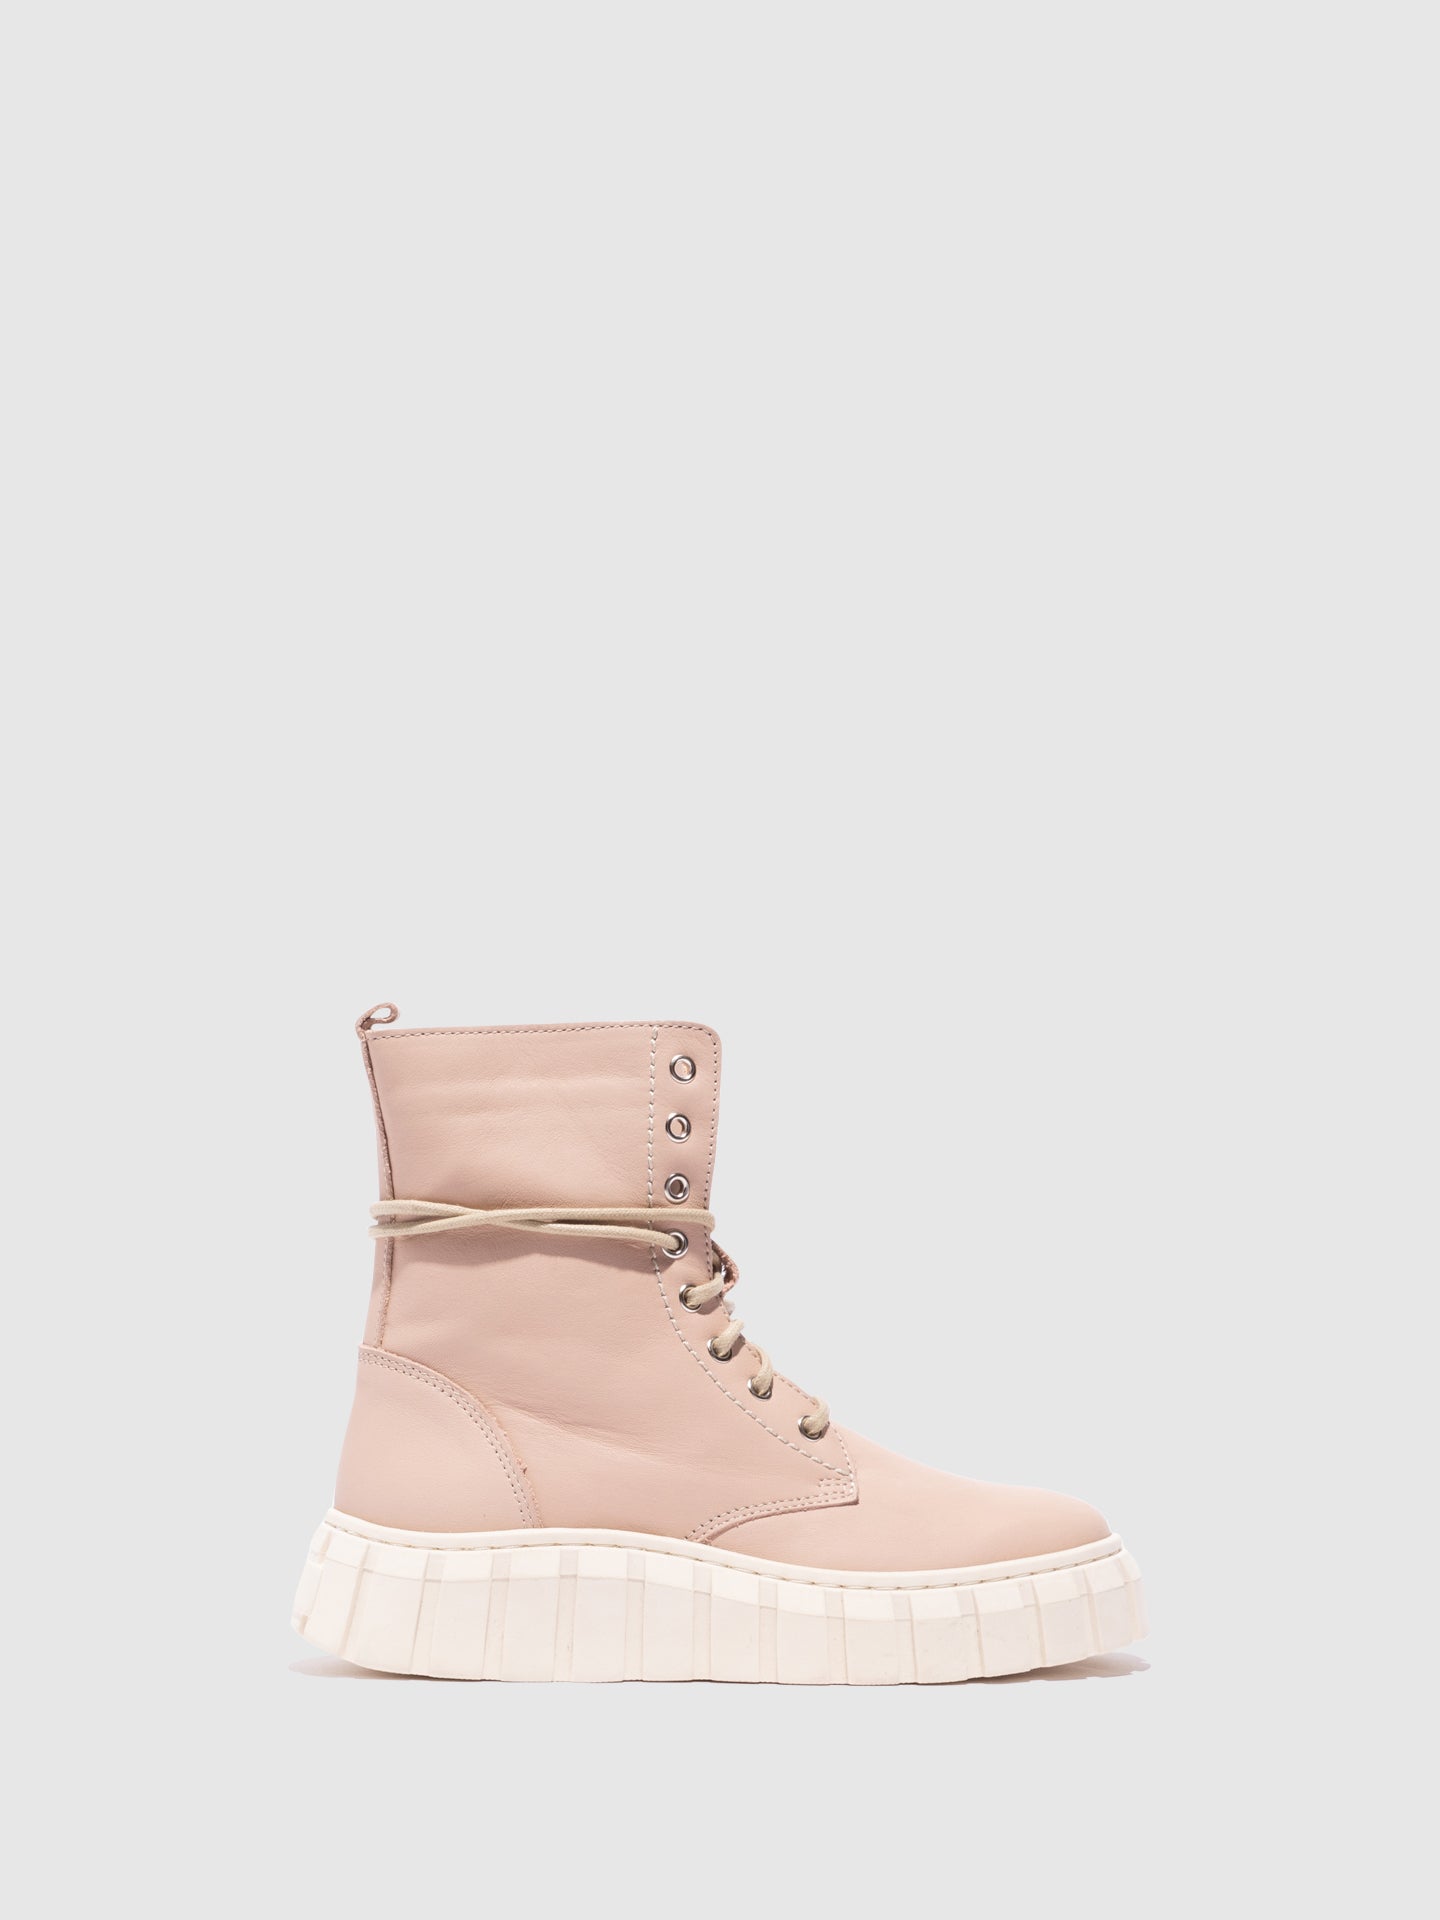 Fungi Pink Lace-up Boots